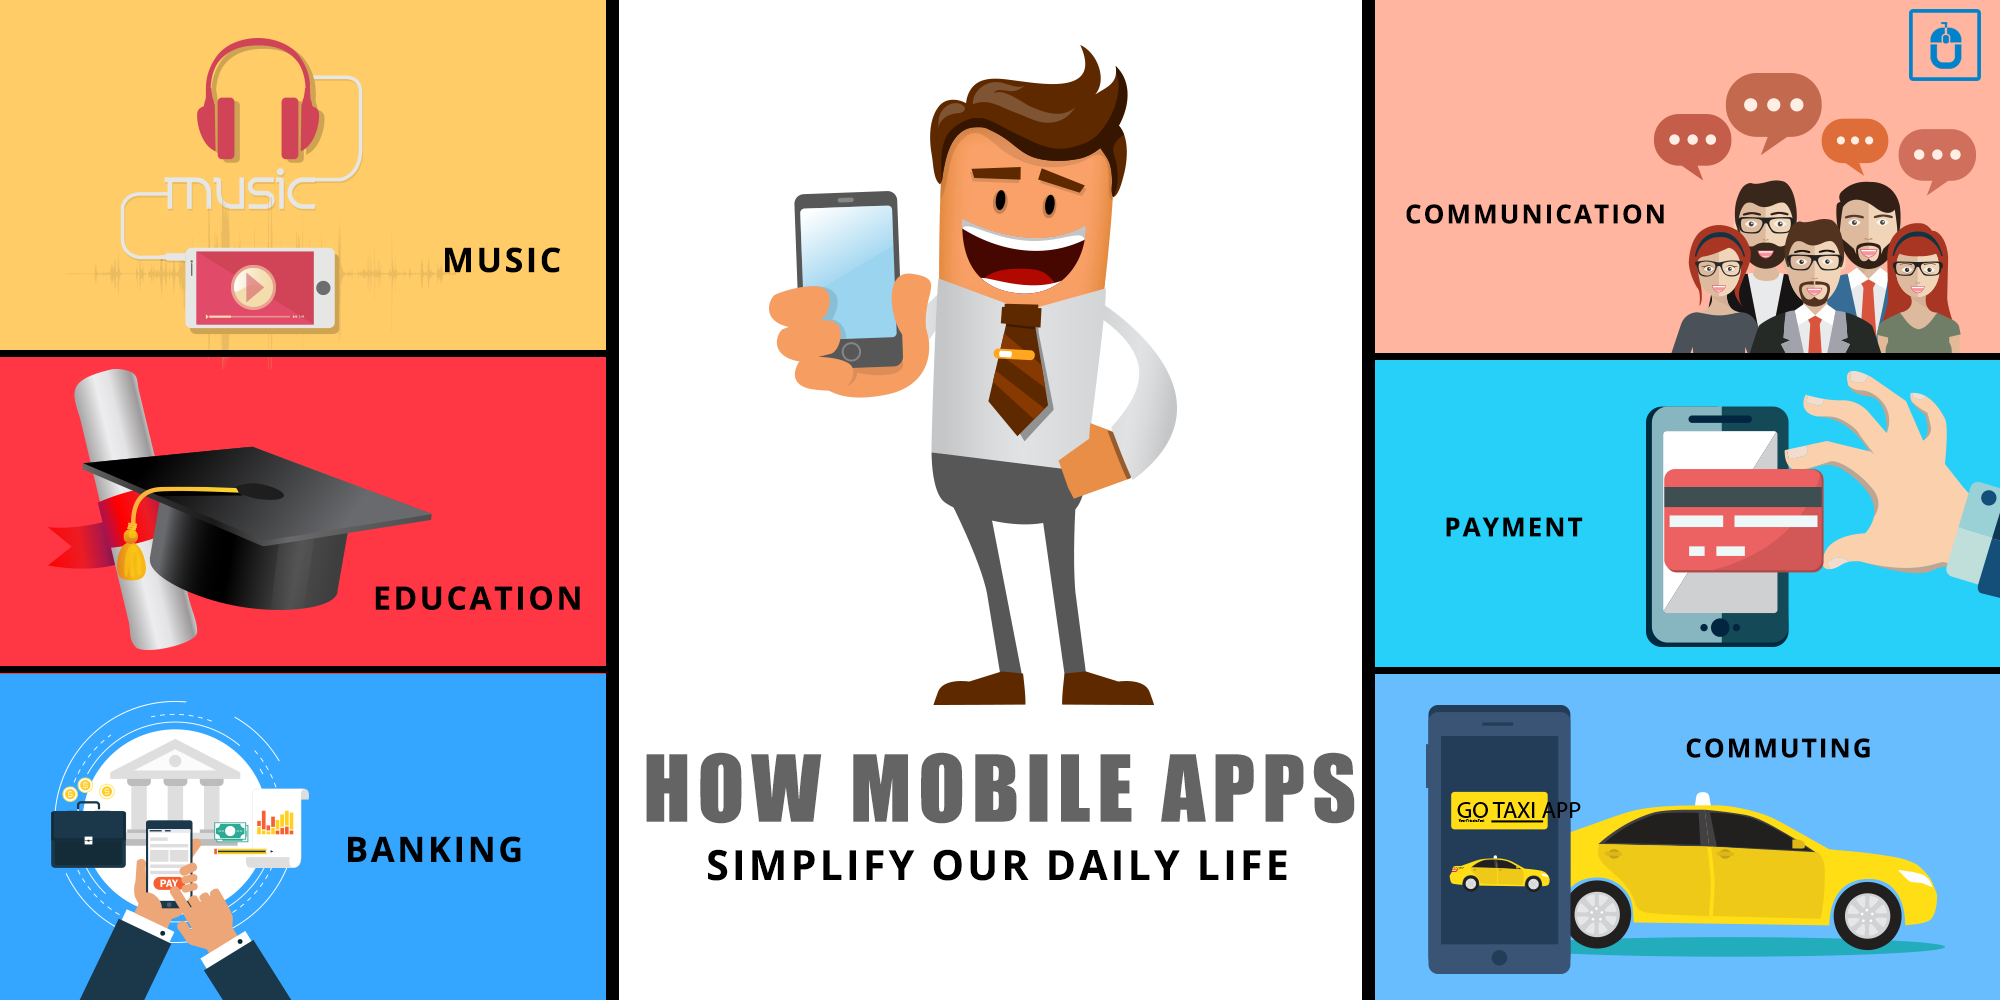 How Mobile Apps Simplify Our Daily Life